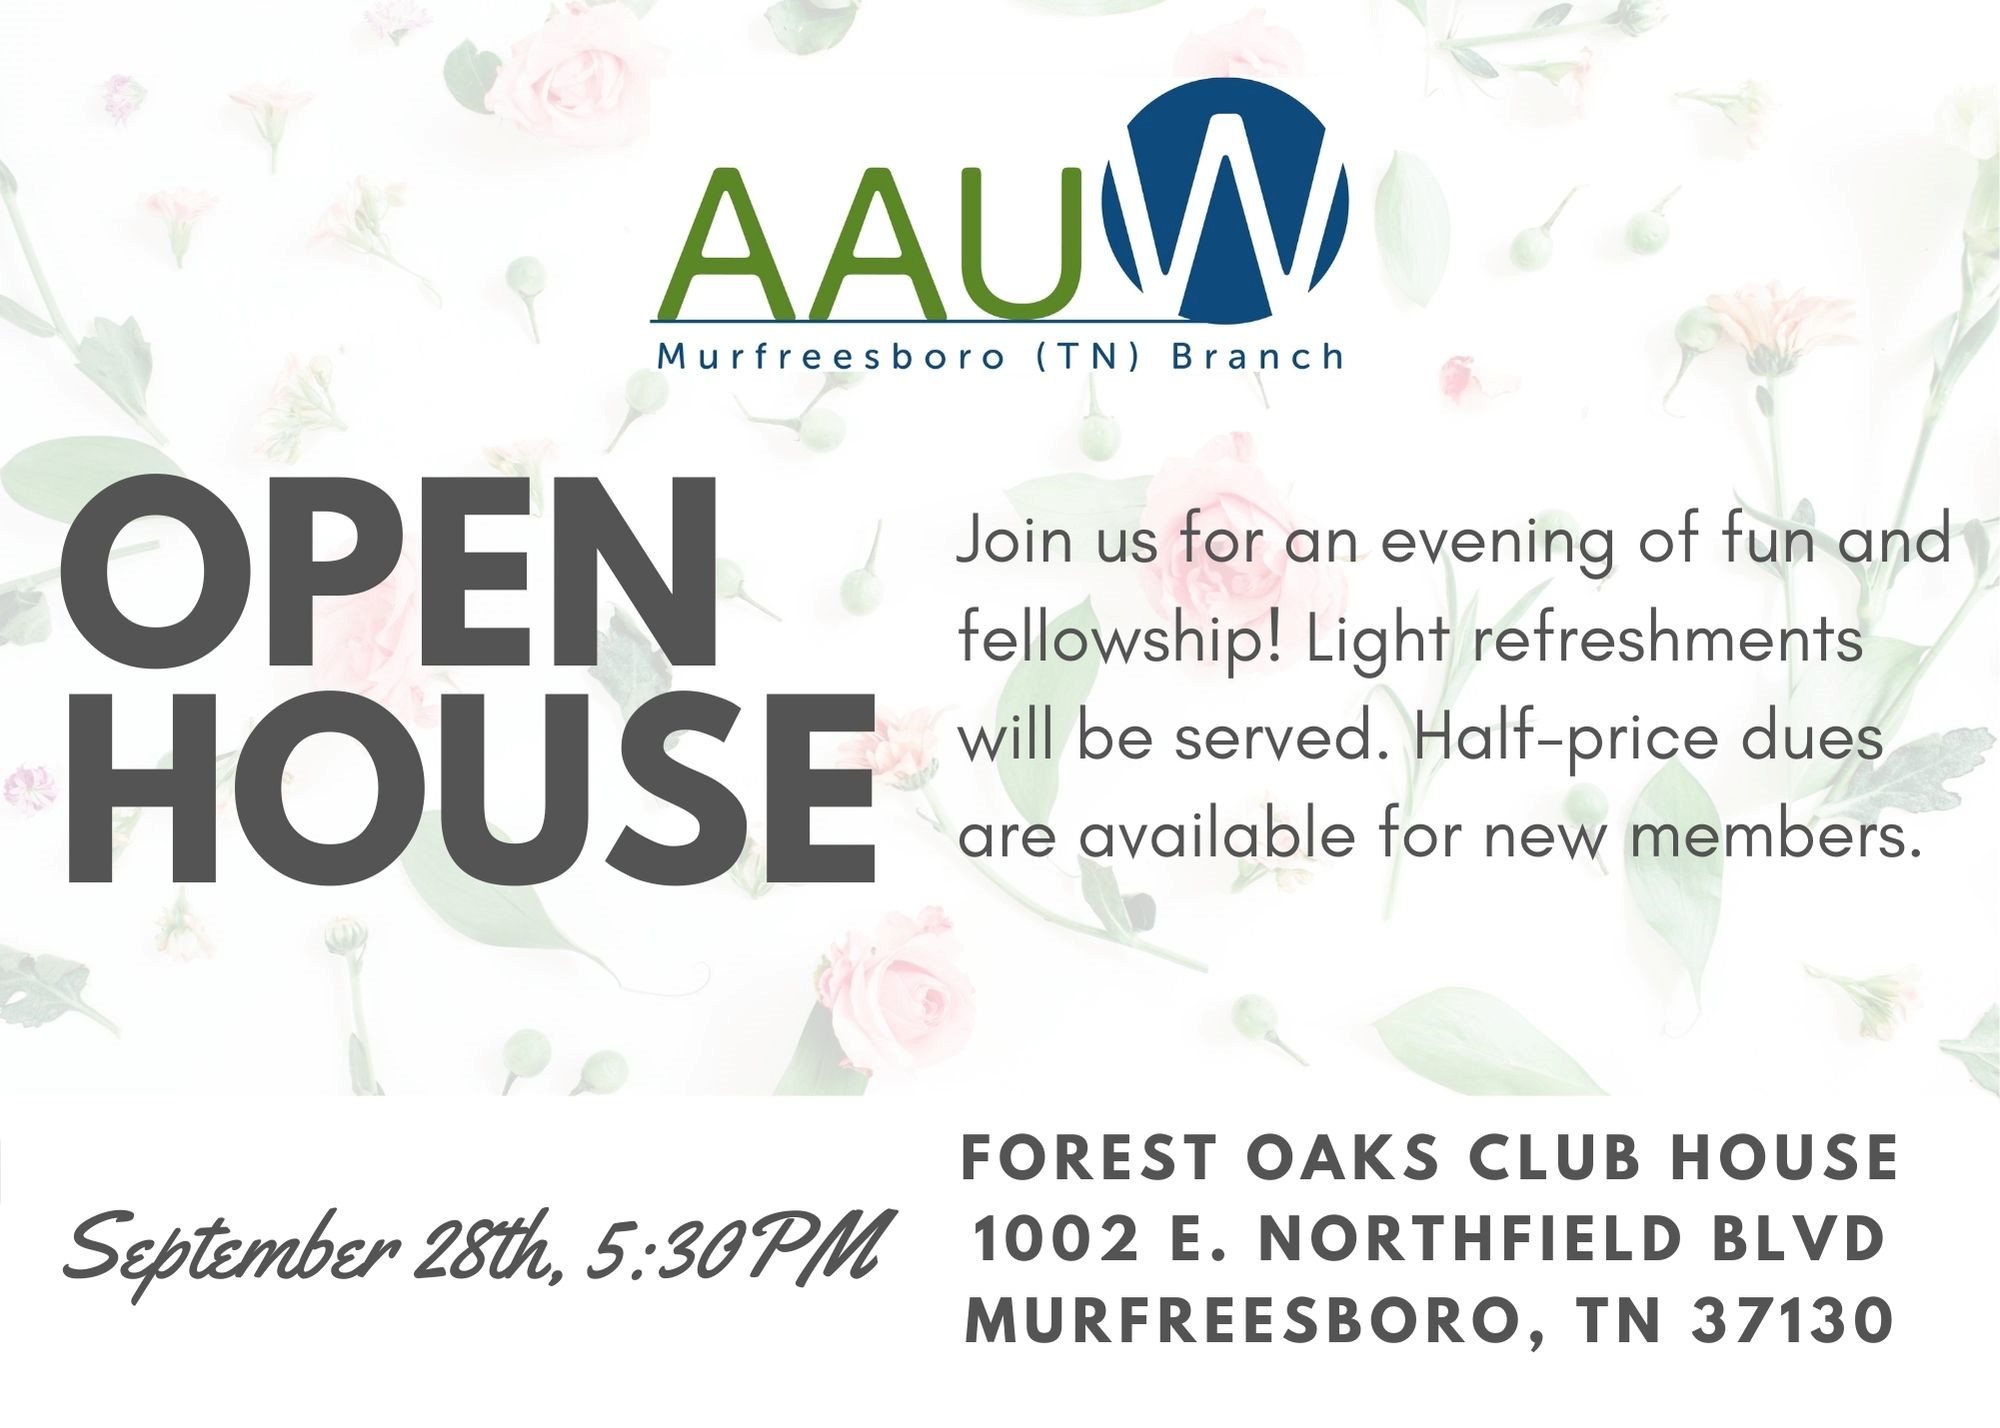 Black text on a light floral background with information about the Open House event. Features the AAUW Murfreesboro logo at the top in blue and green.